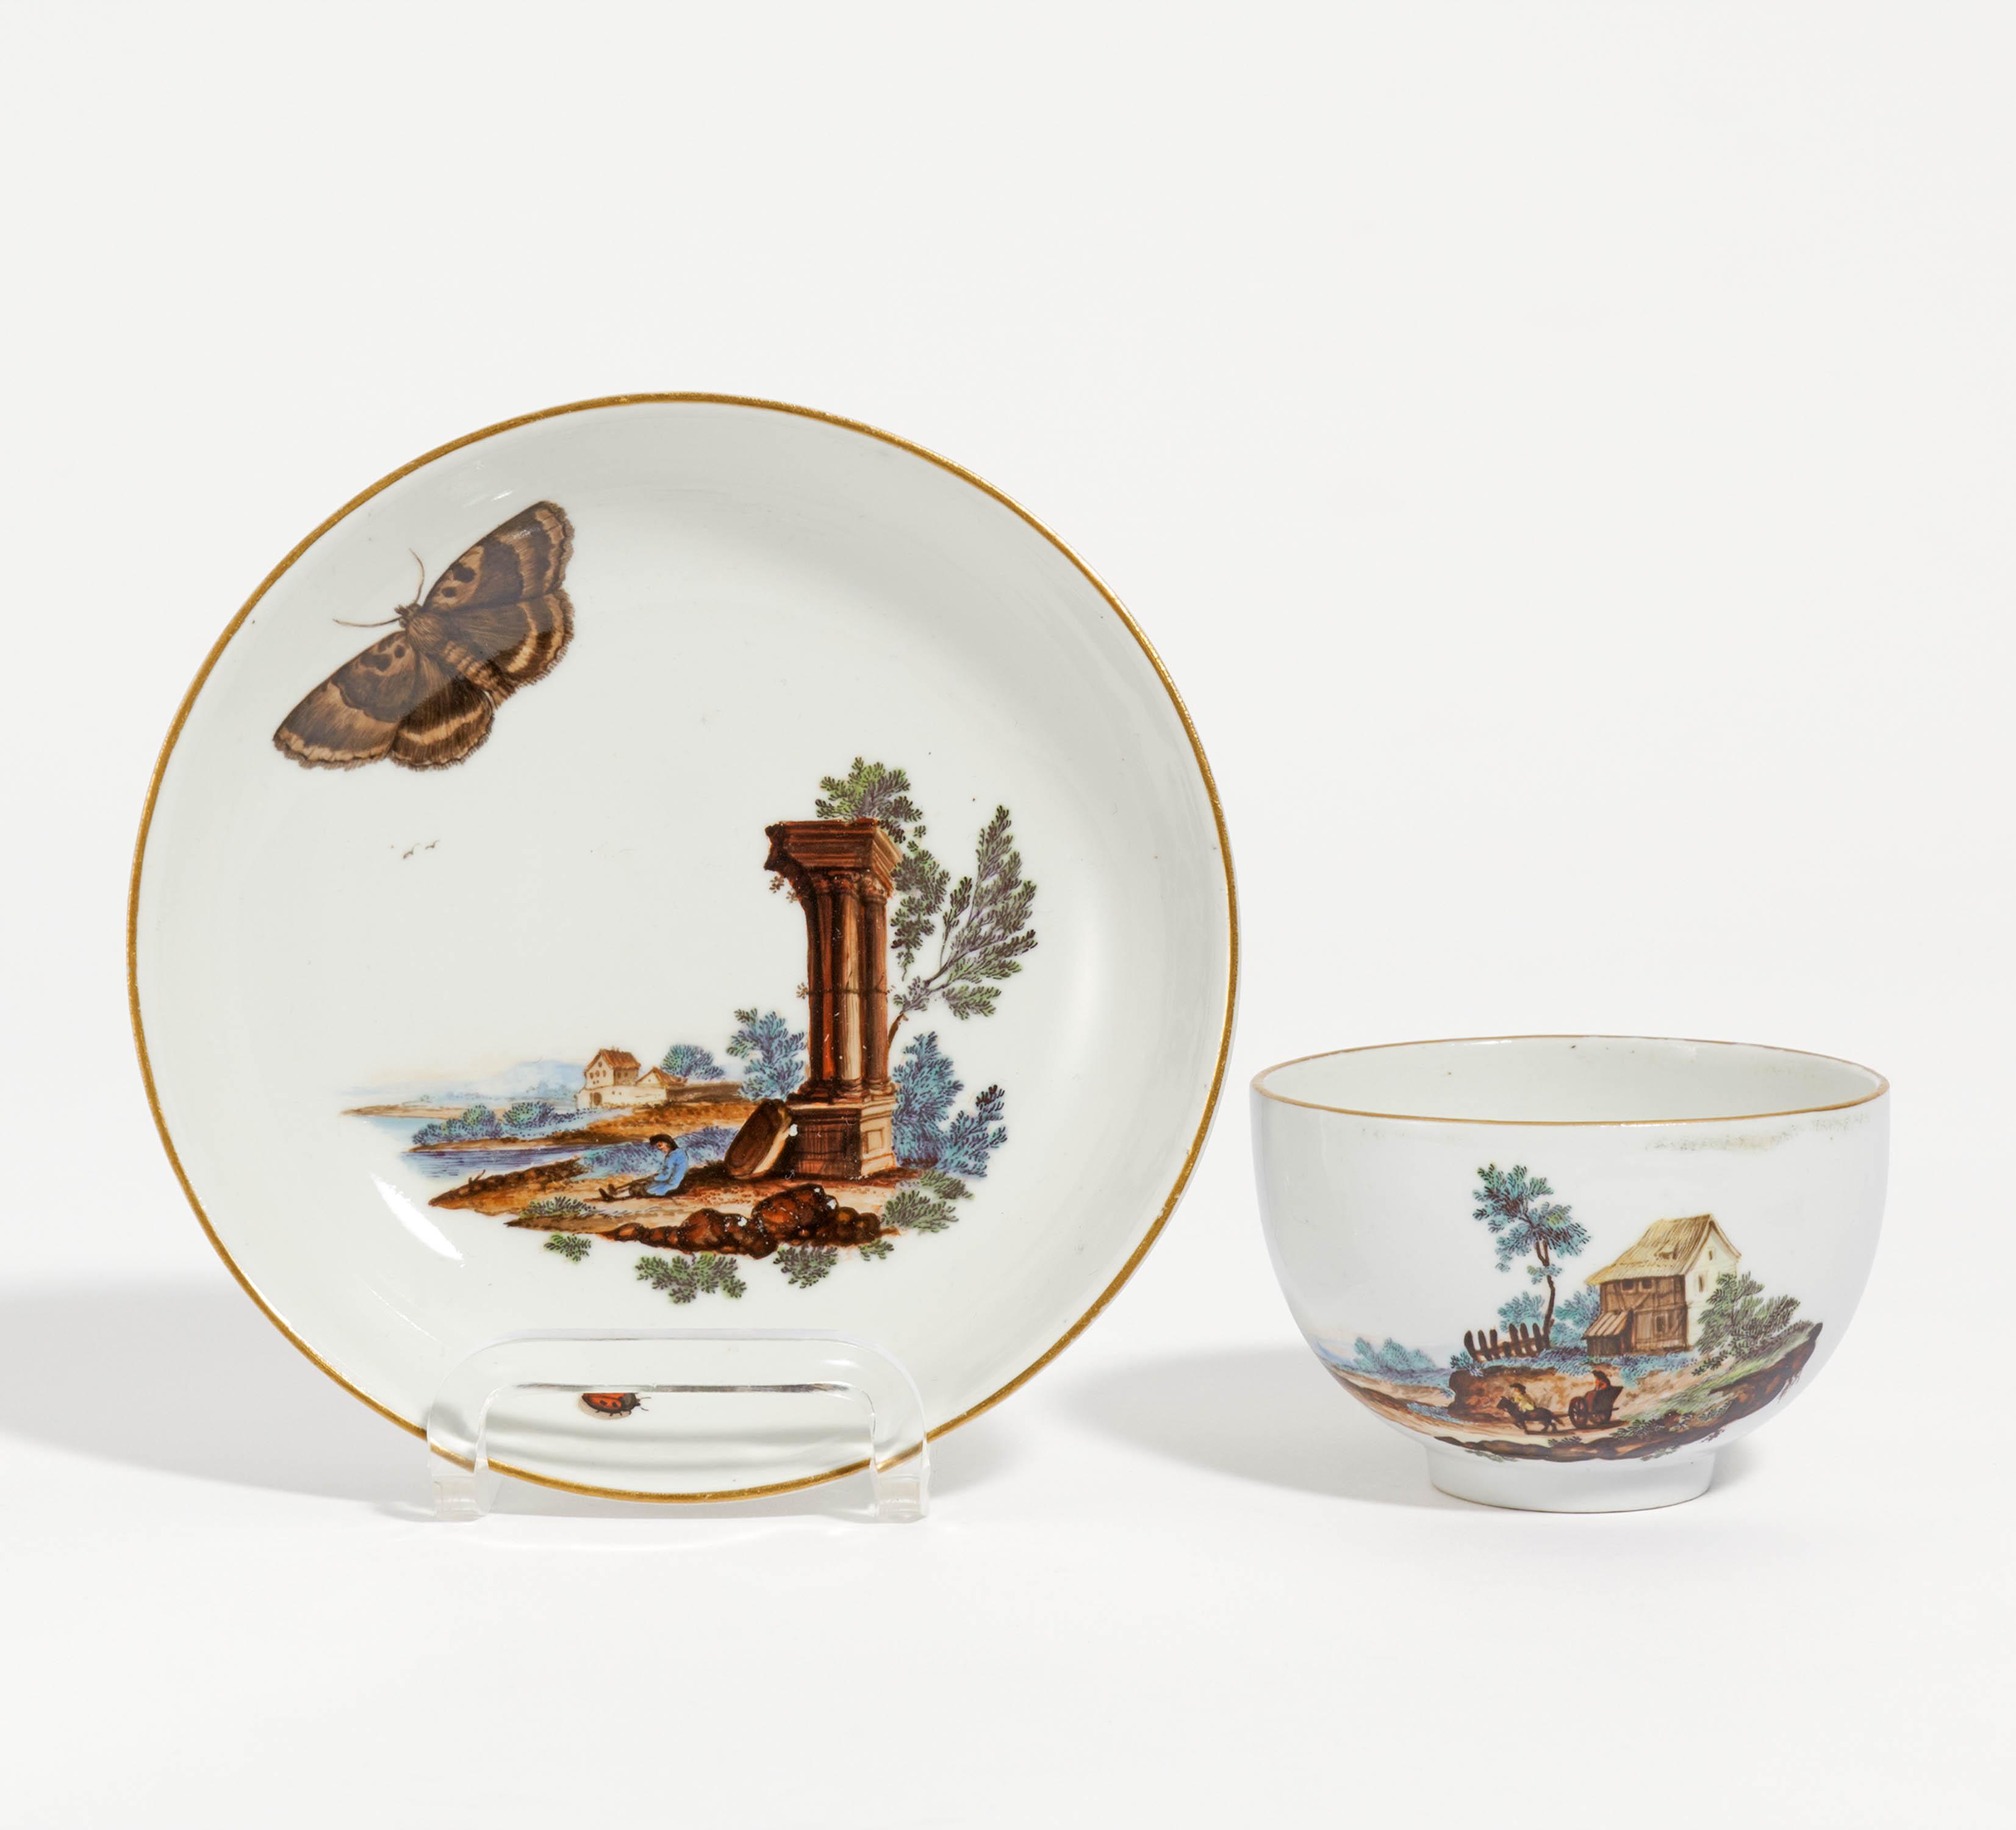 Cup and saucer with rural scenes and insects